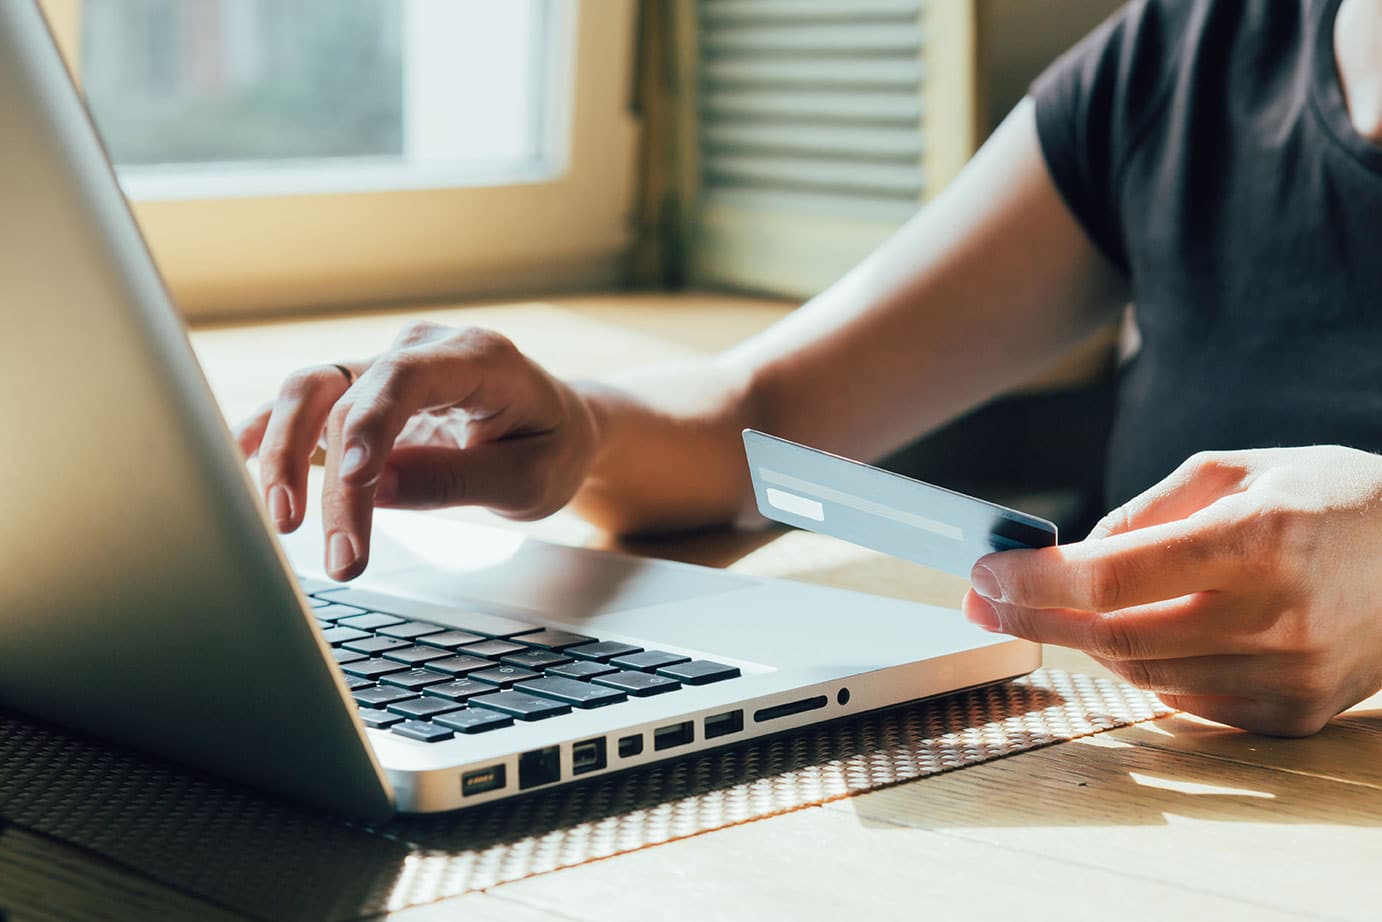 A photo of someone using their laptop while holding a credit card in one hand